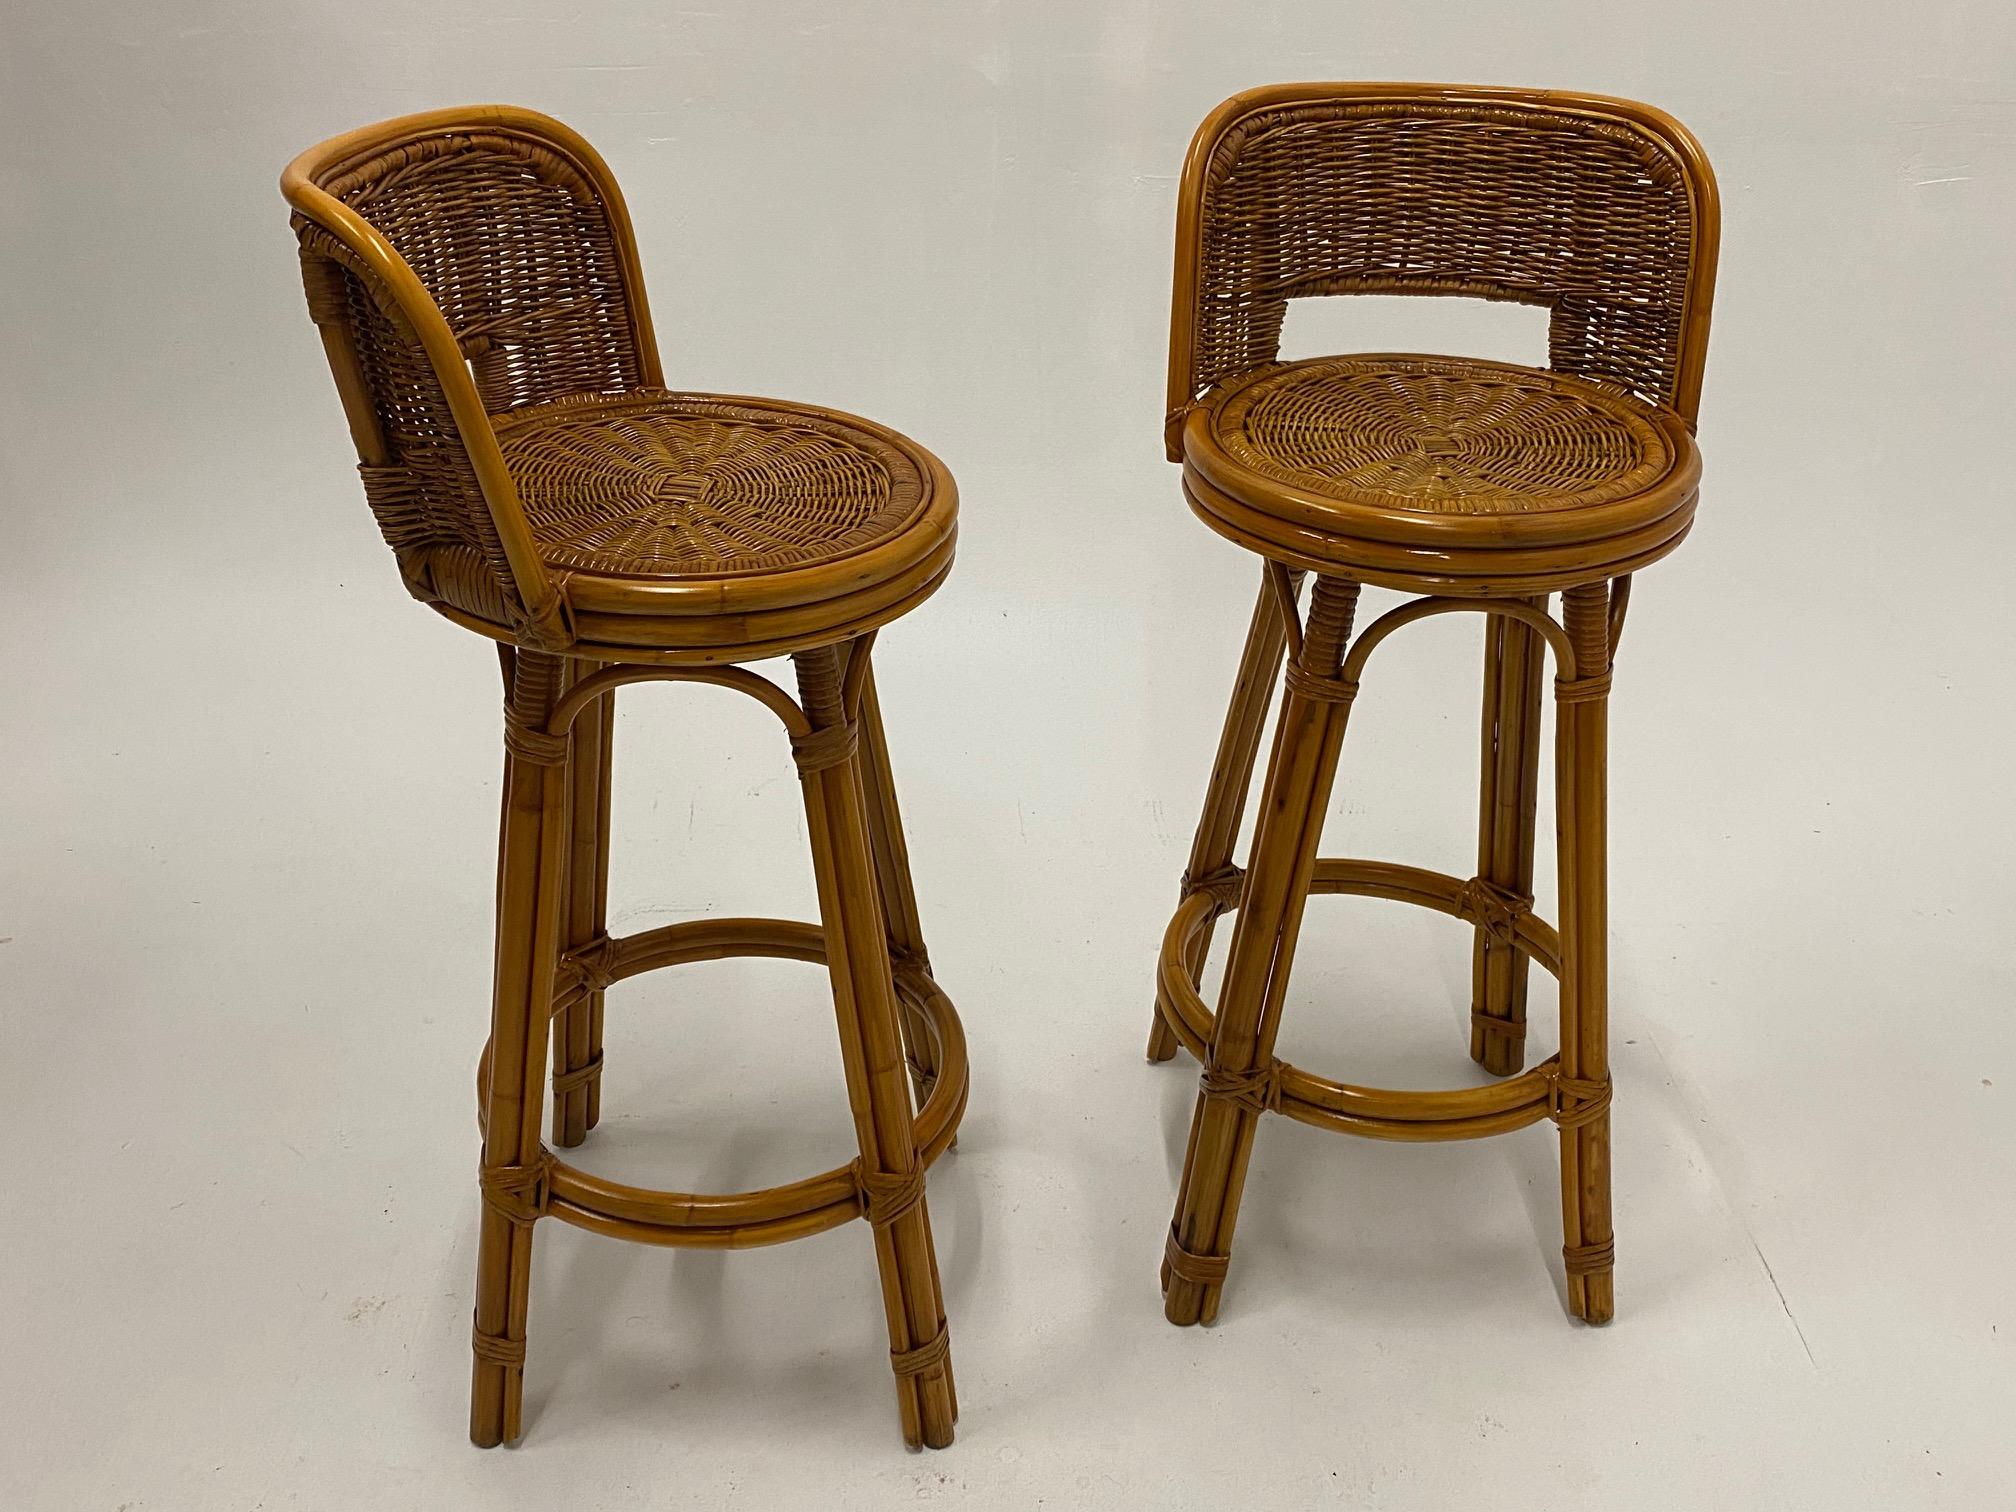 Handsome Pair of Mid-Century Modern Woven Rattan Barstools For Sale 8